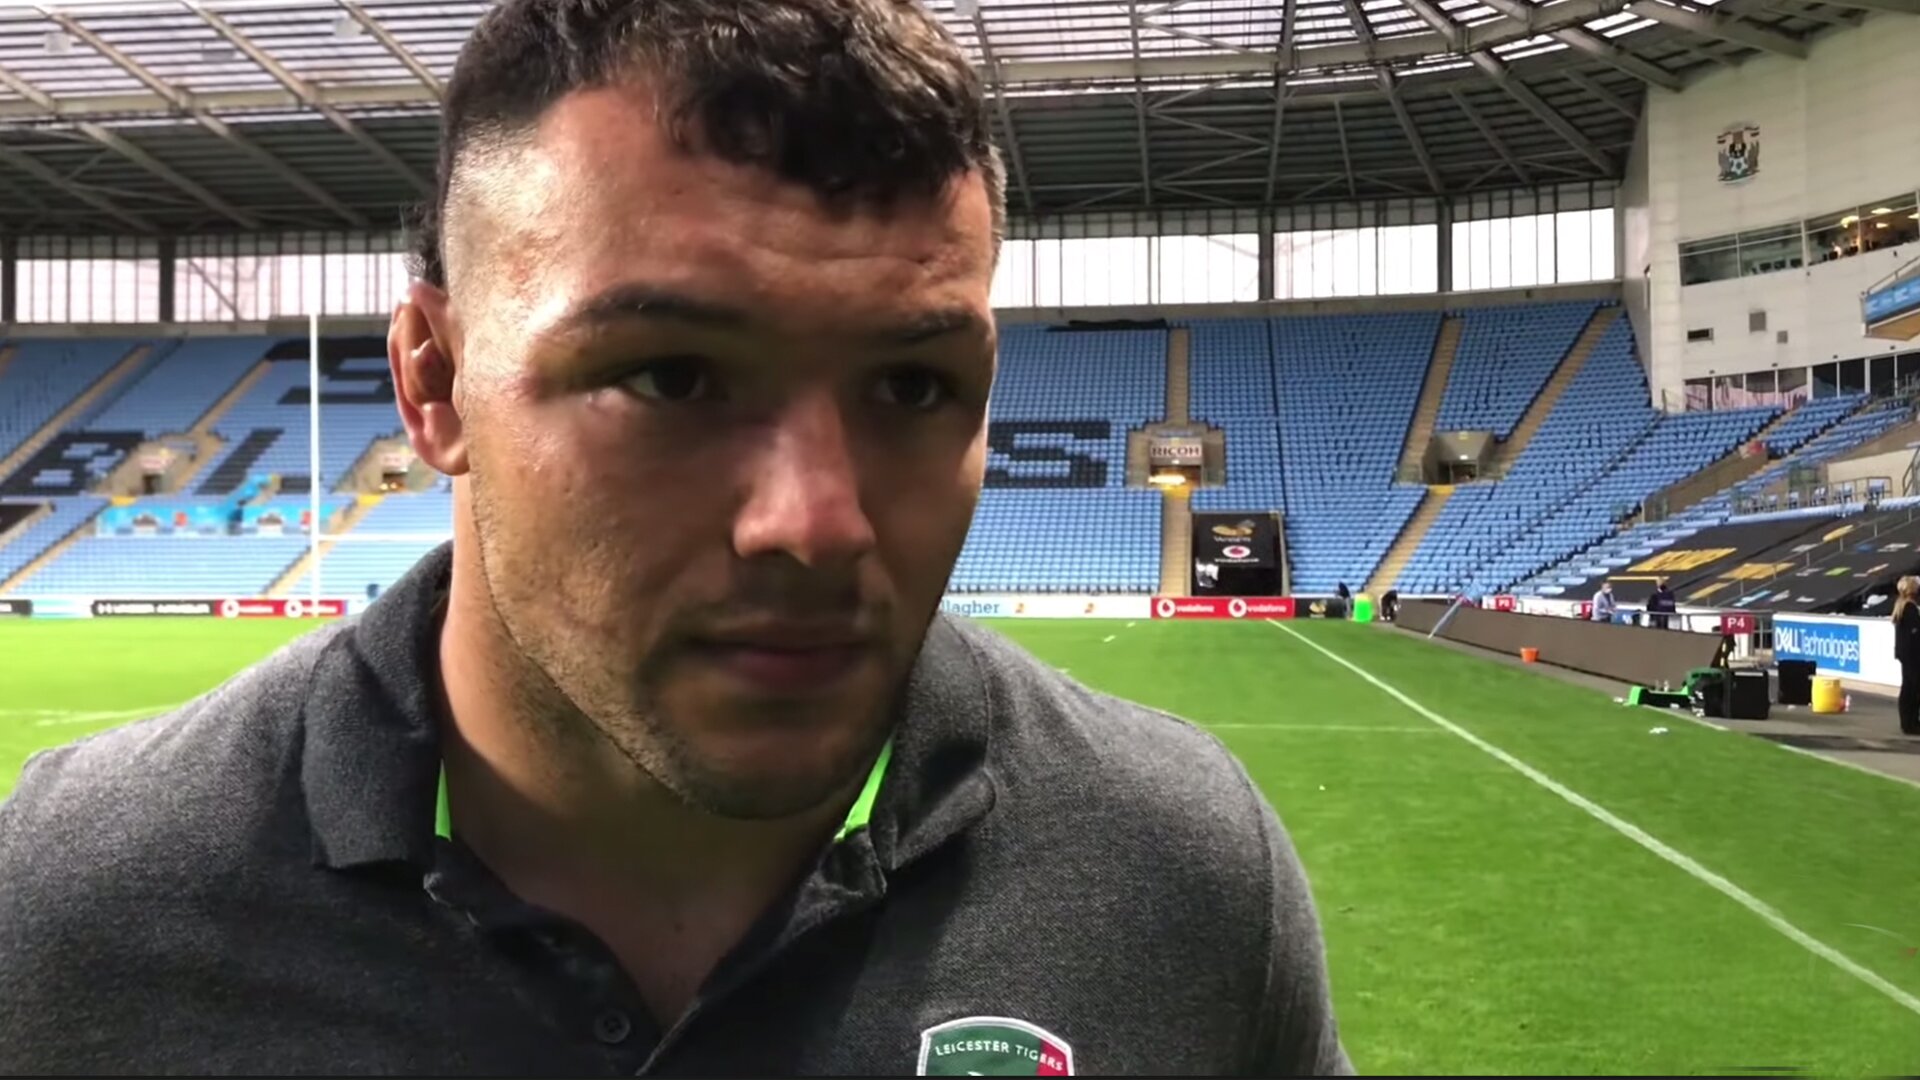 Ellis Genge gives one of the most brutal post match interviews after embarrassing Wasps defeat